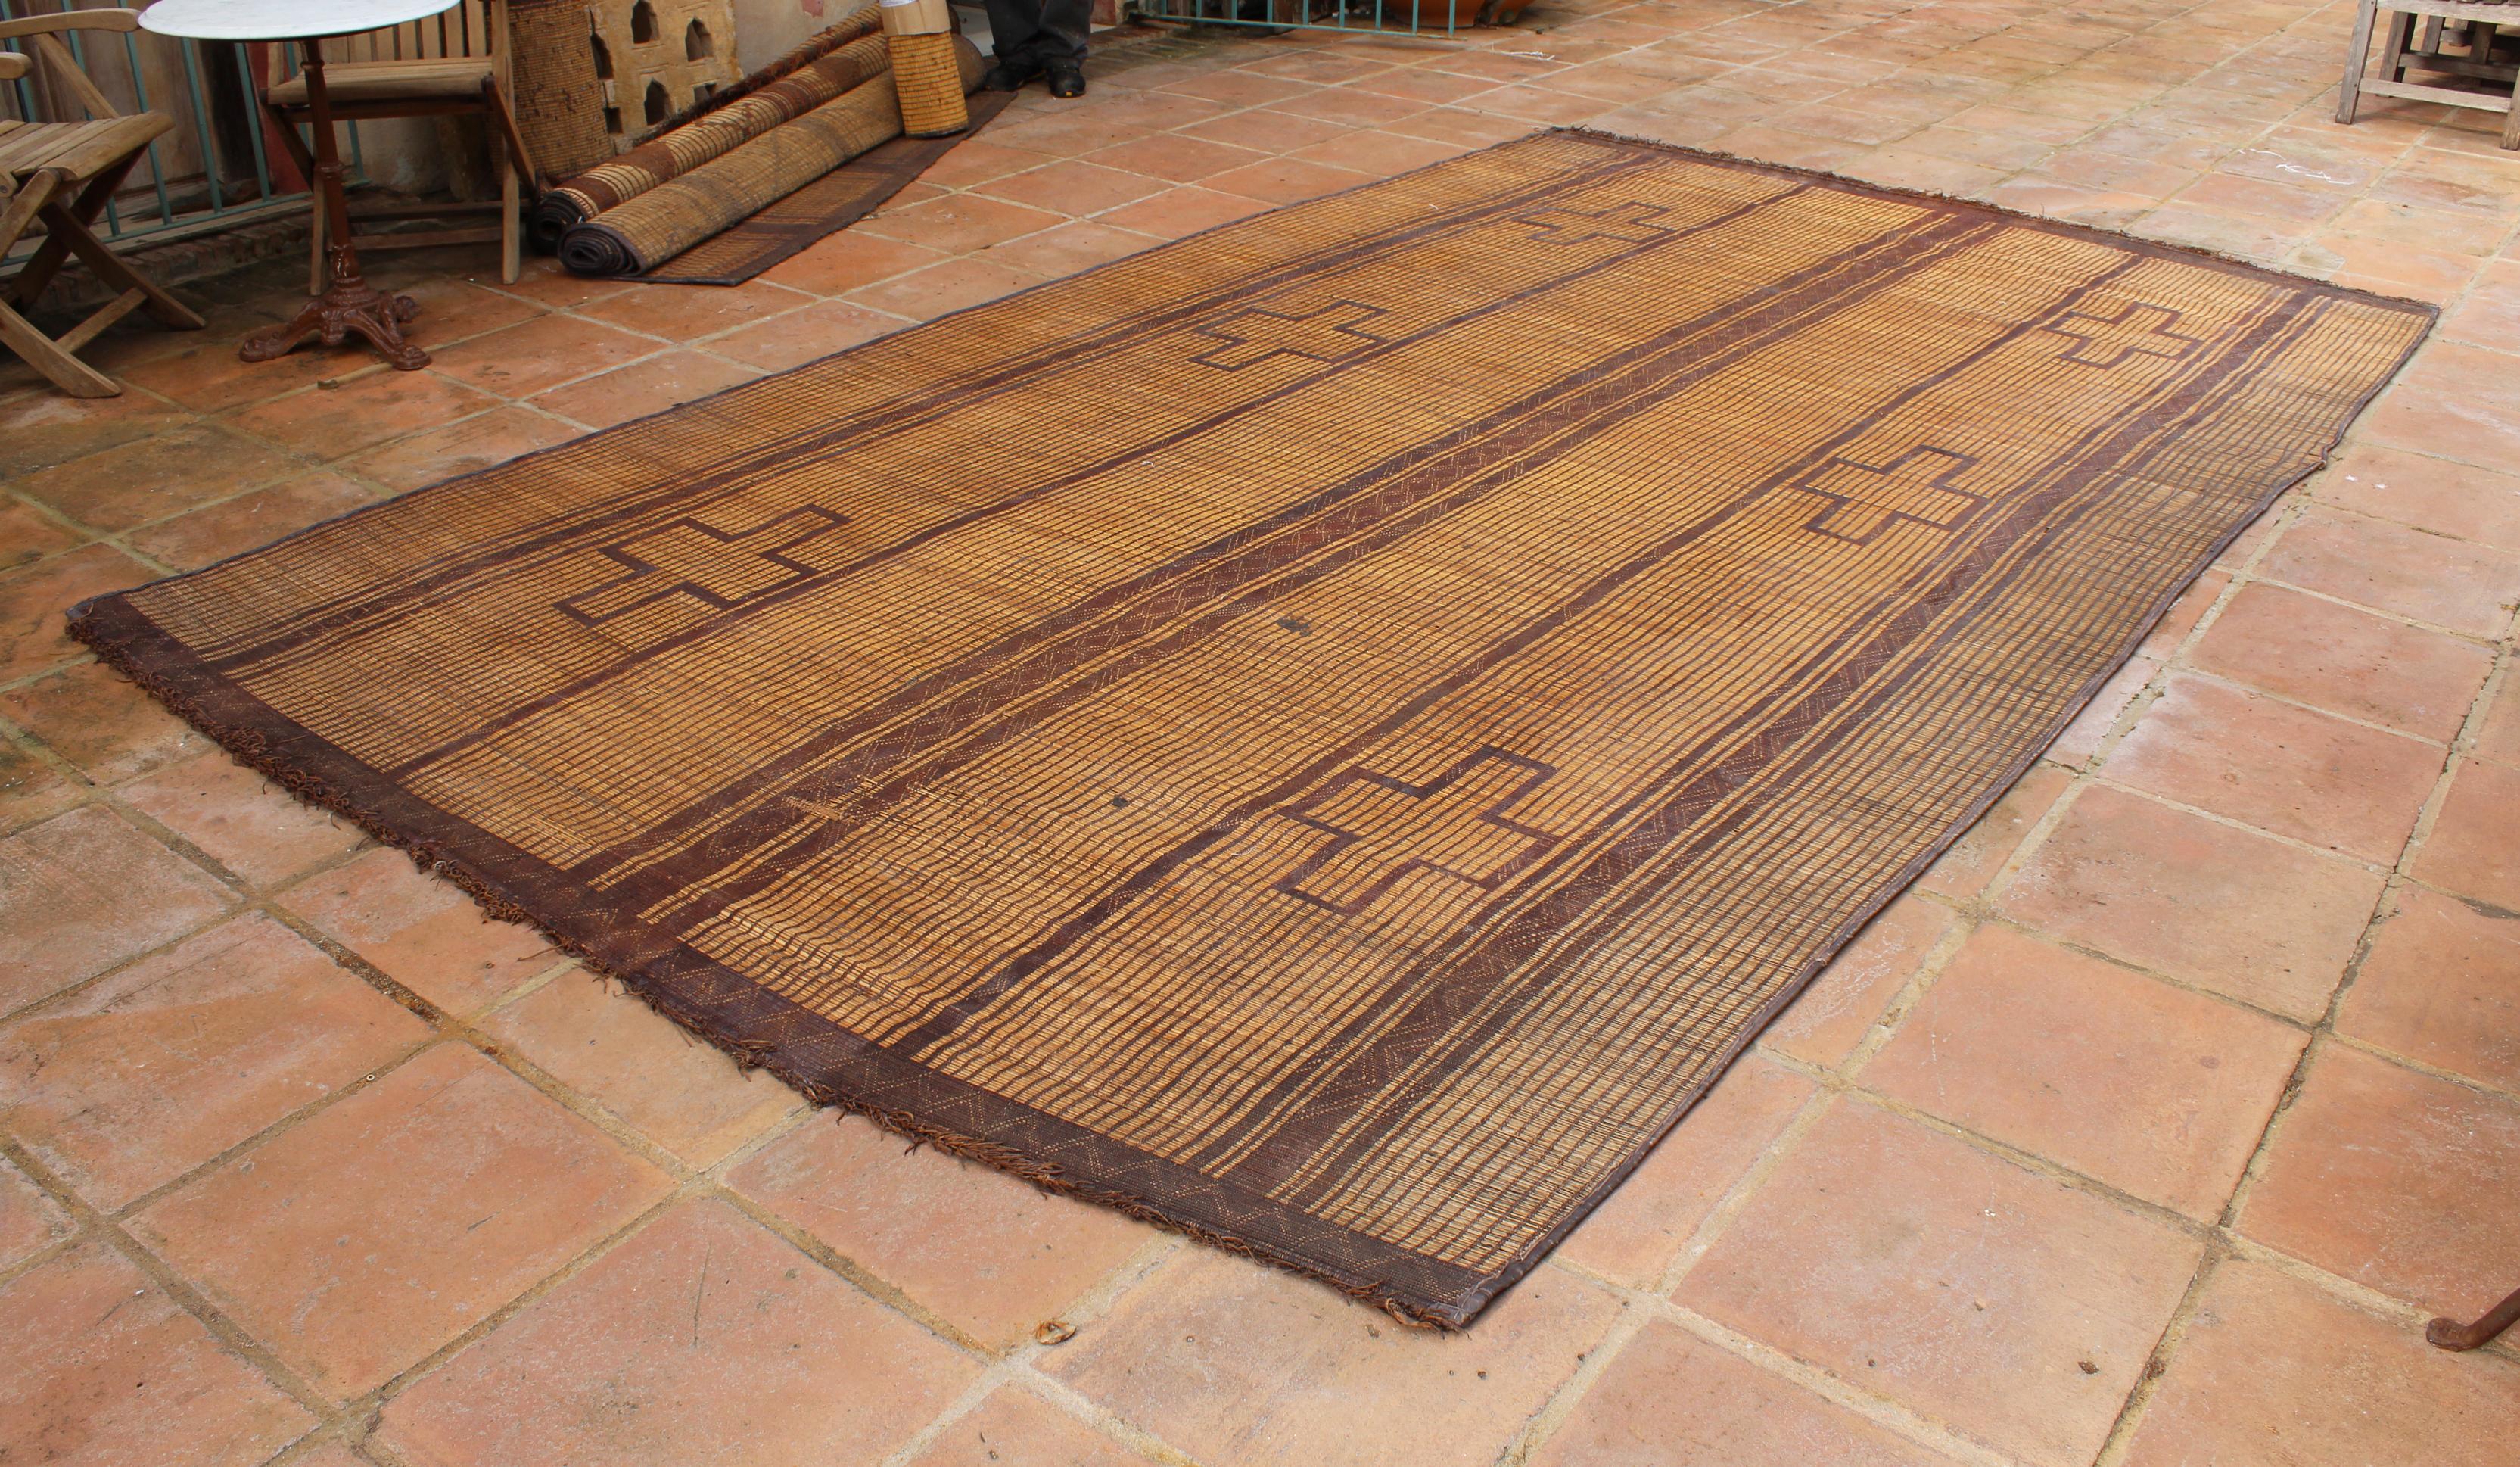 Mauritanian Tuareg leather mats are made of dwarf palm tree fibers and hand woven with leather stripes, this are great to use indoor or outdoor, beautiful brown earth-tone colors. This vintage midcentury carpets are made in Mauritania and have the